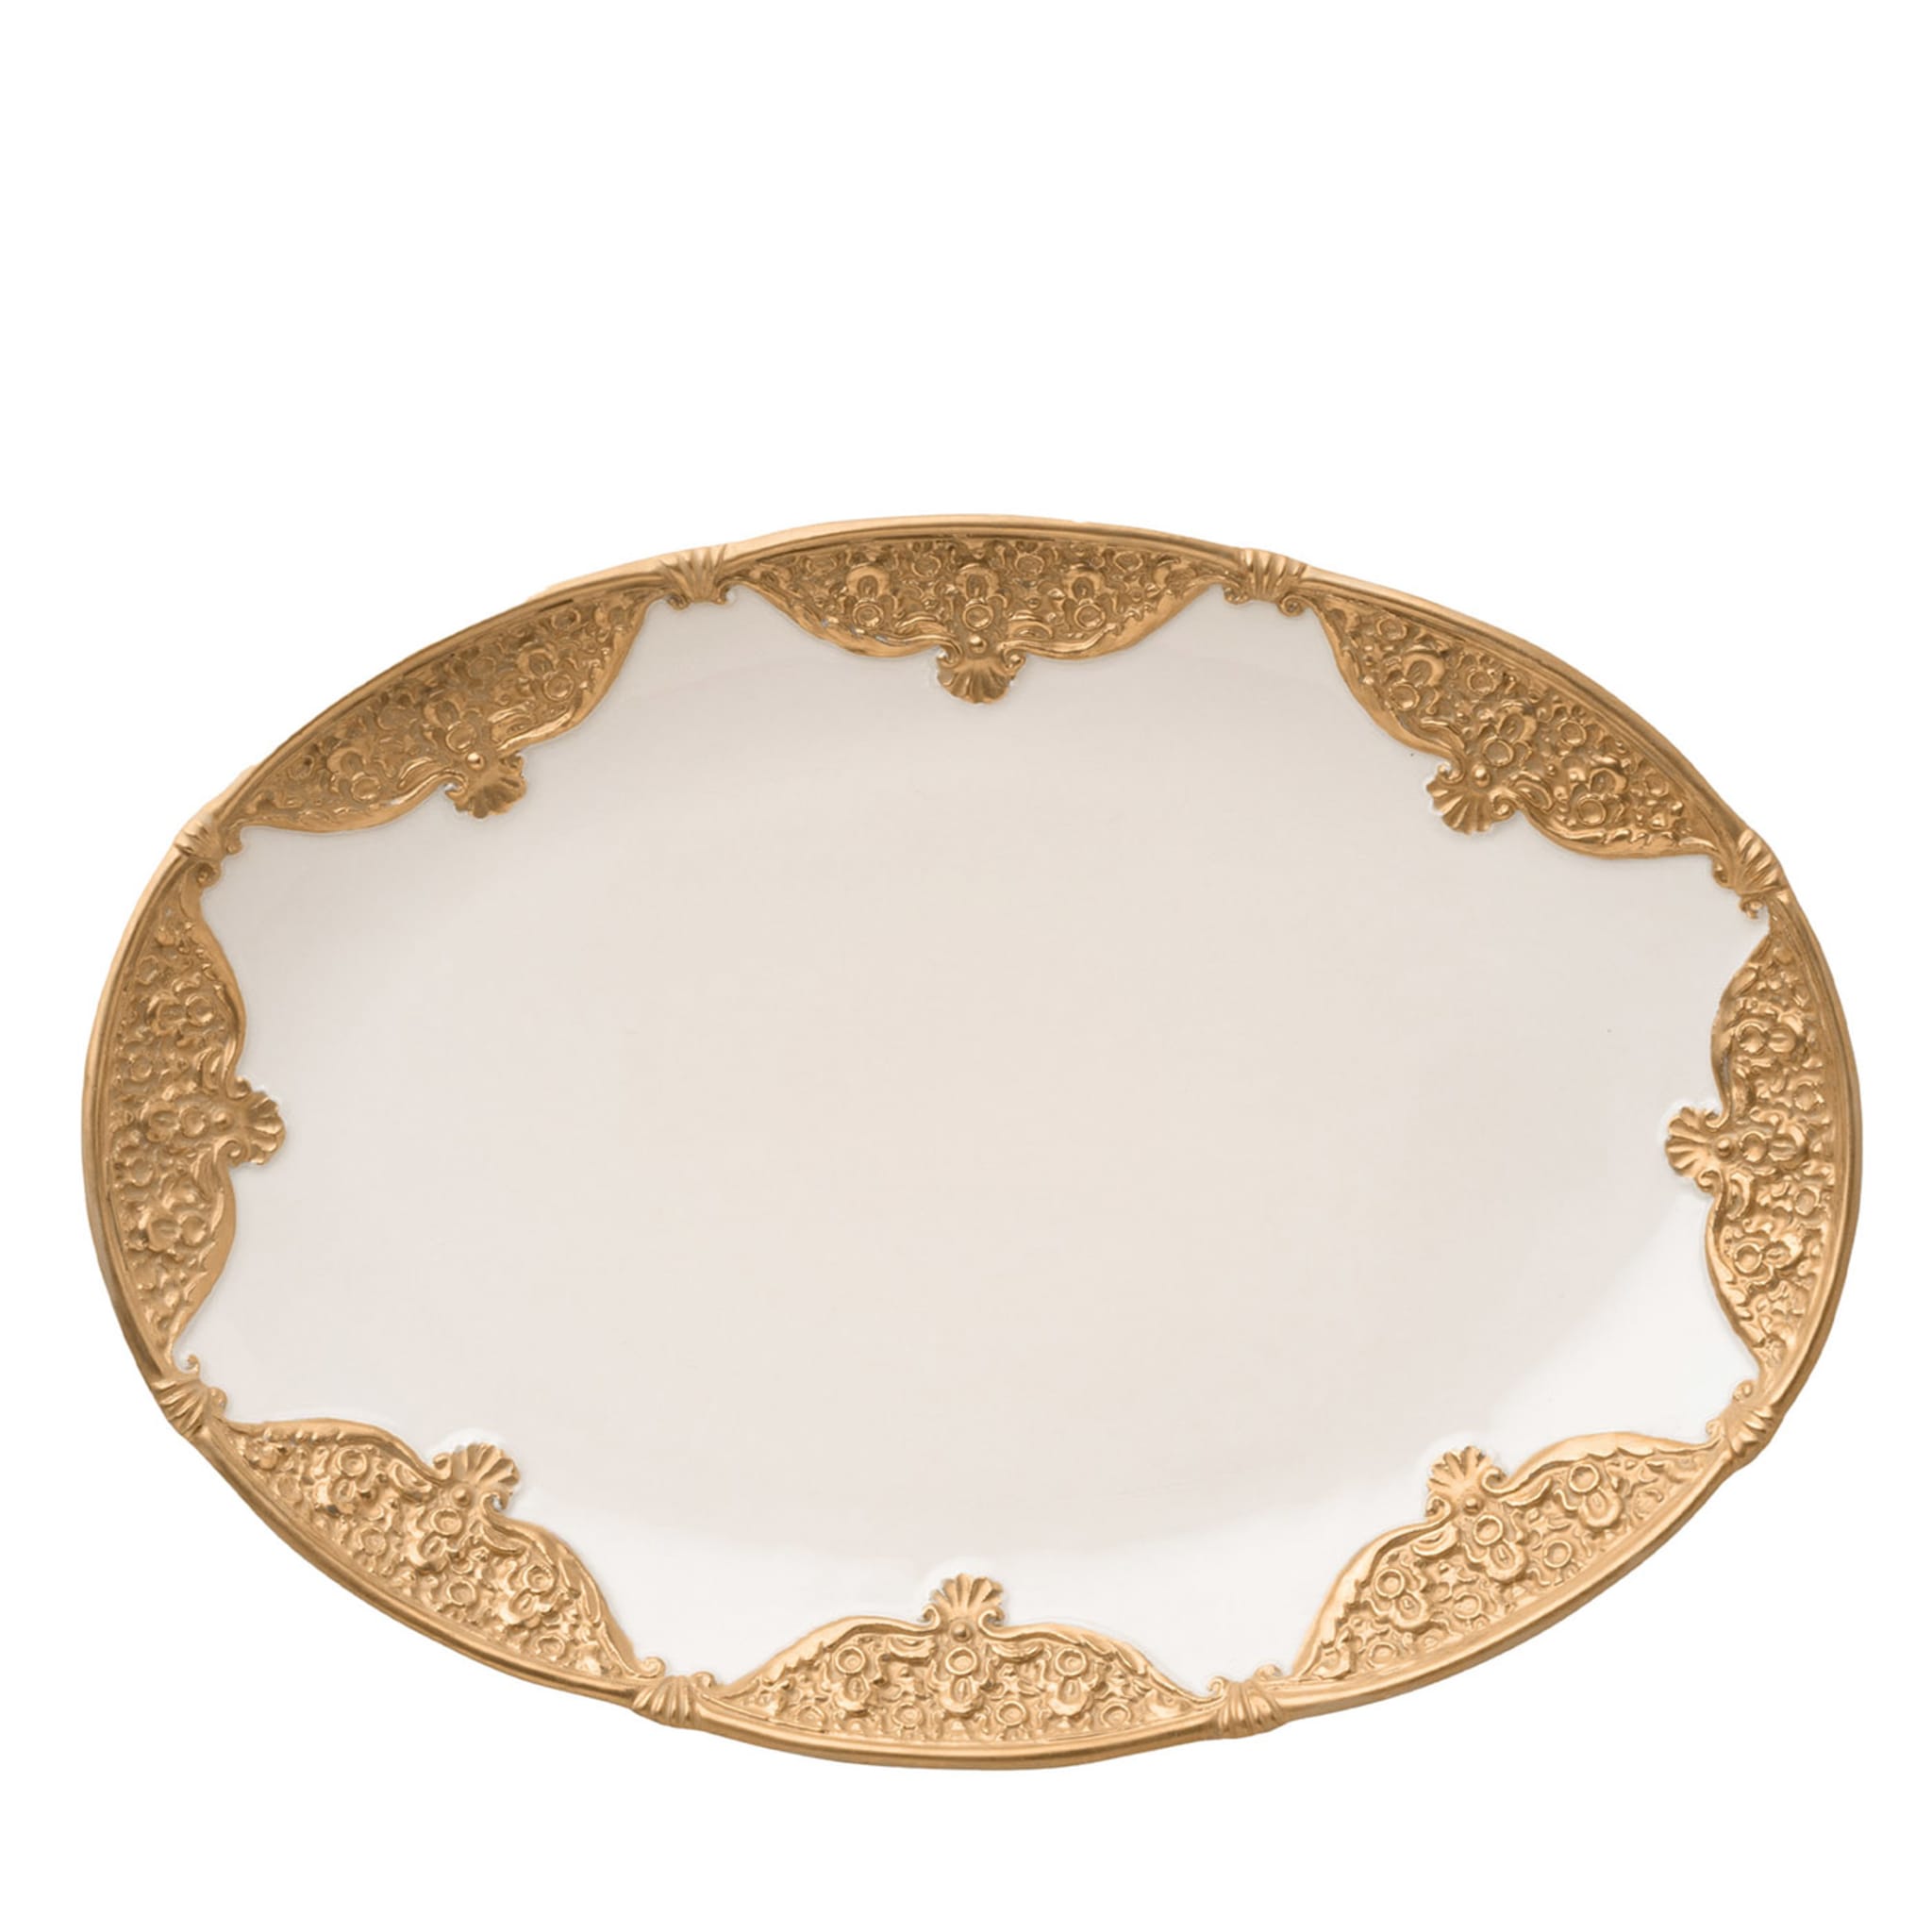 Caterina Small Oval White & Gold Serving Plate - Main view